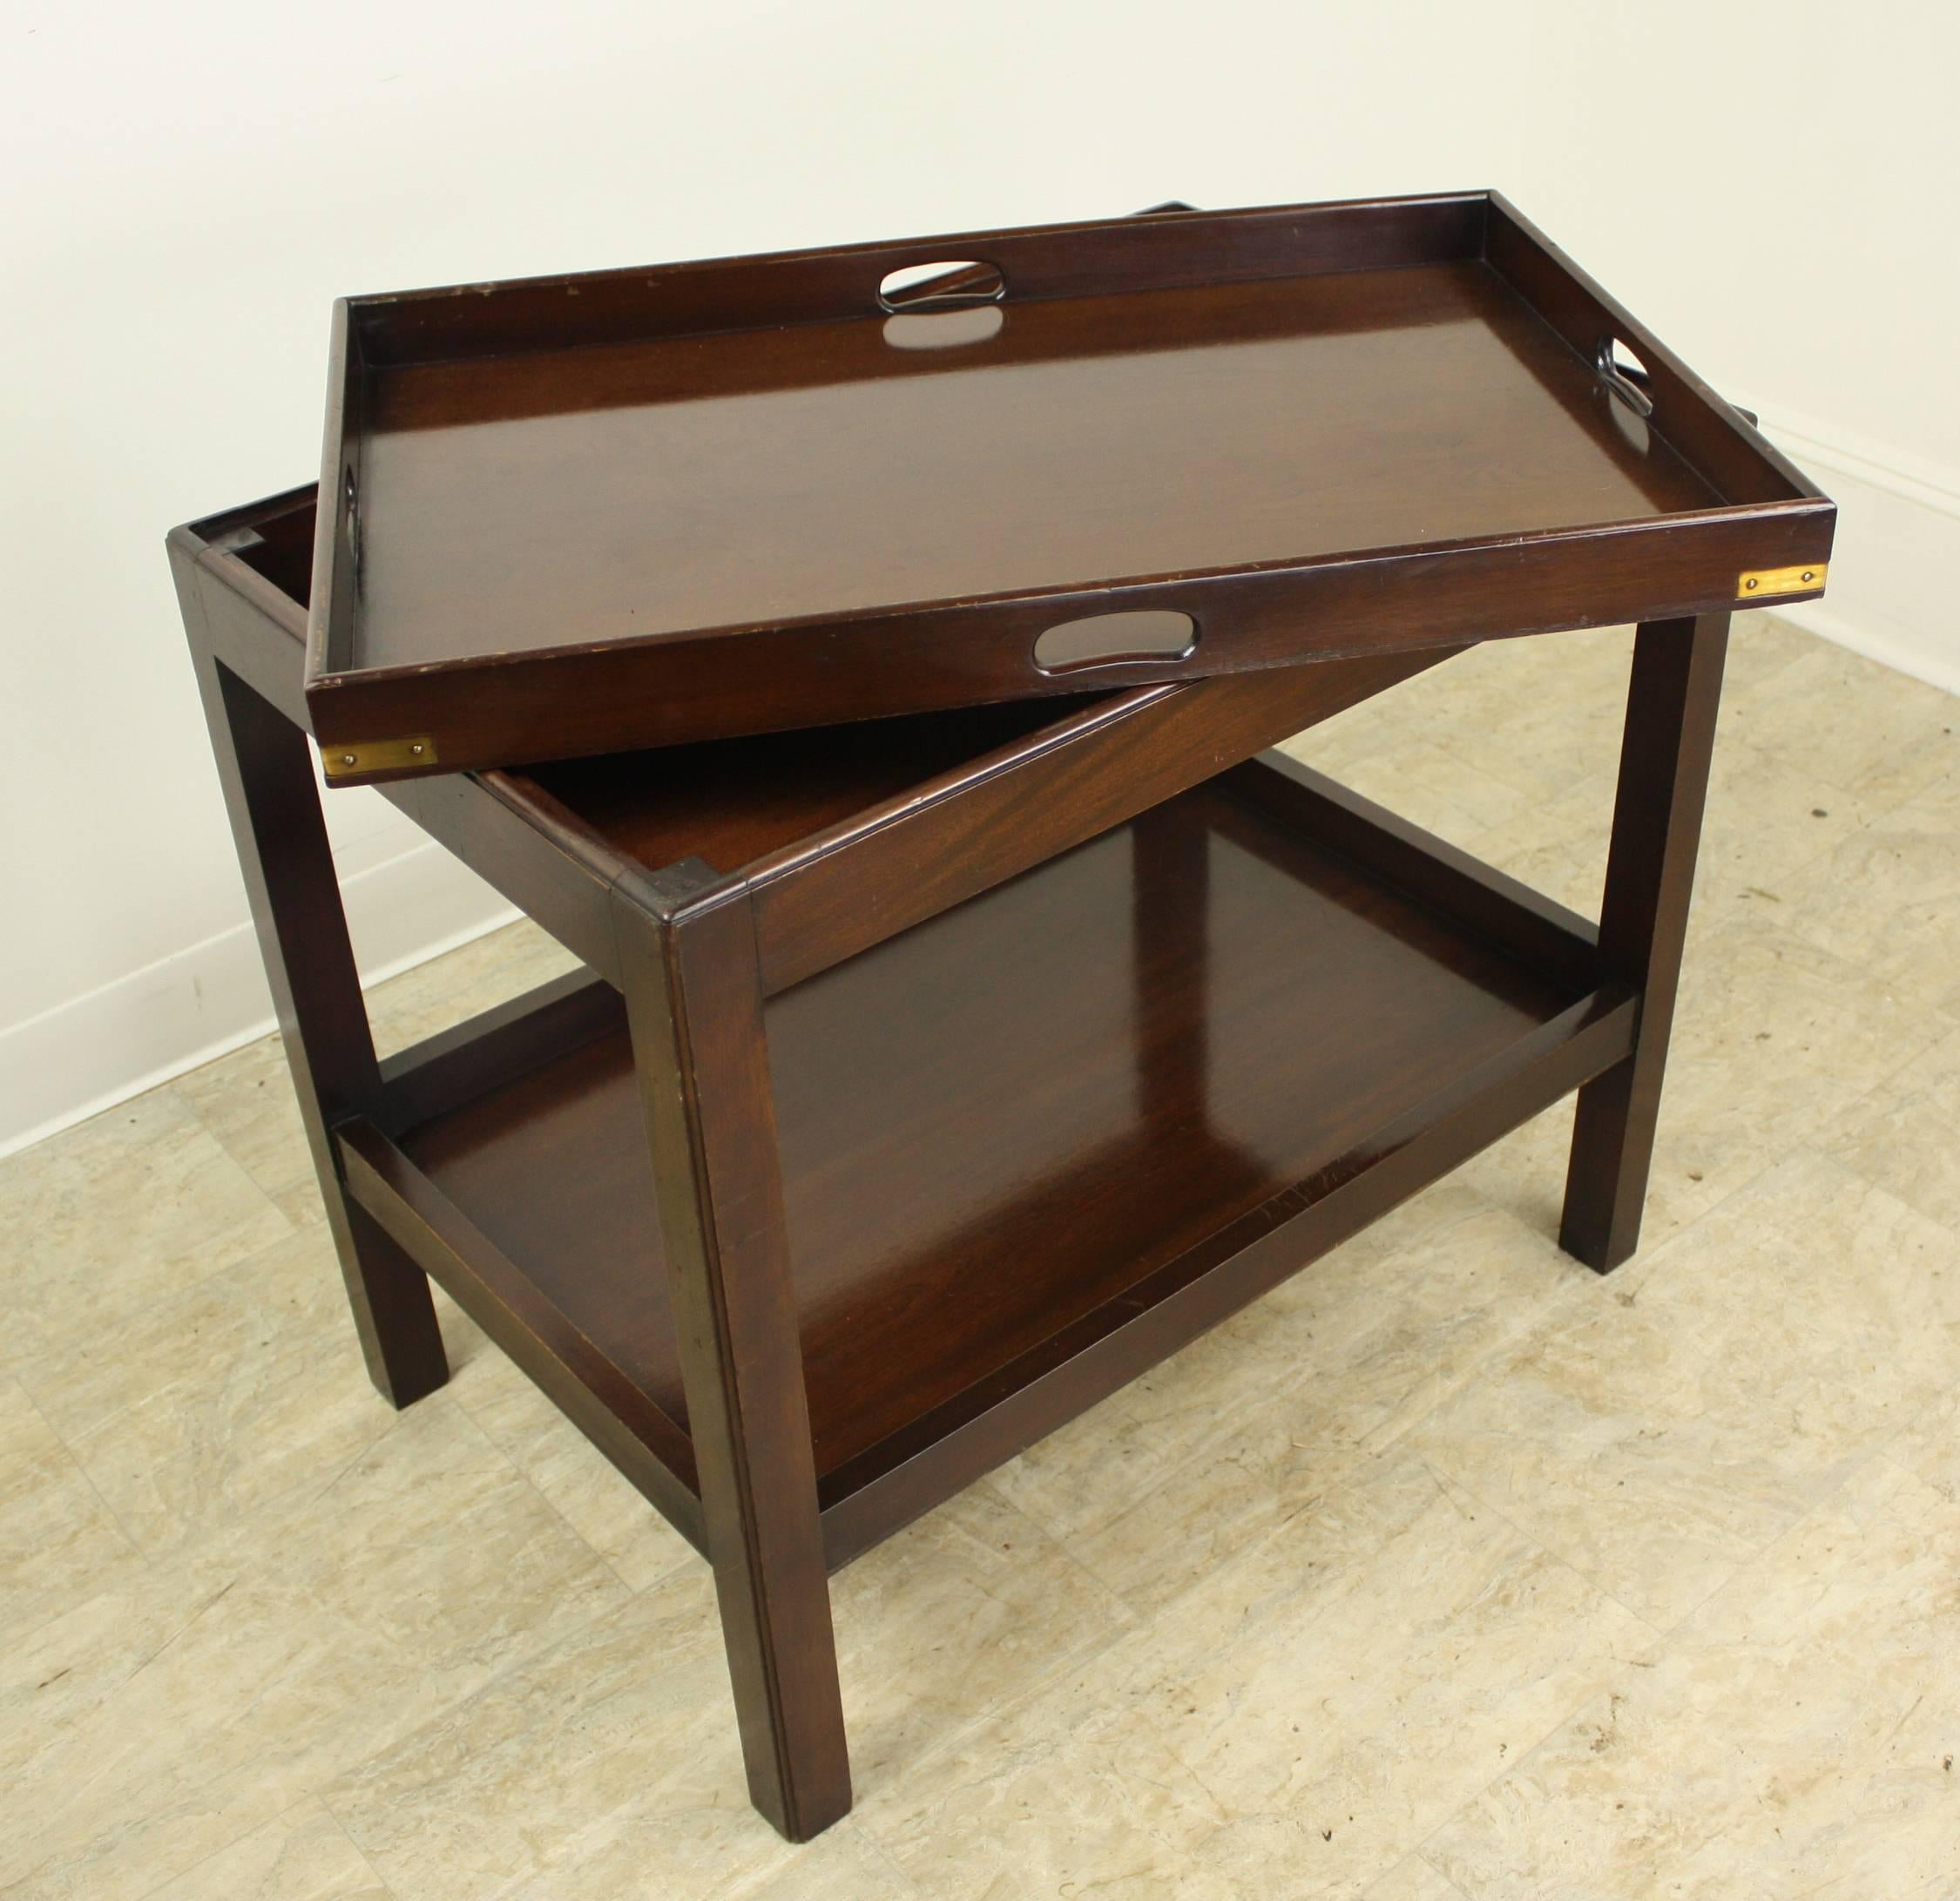 A Classic dark mahogany tray on table. The elegant tray sits well on its base. Easy to lift off and use for serving if desired. Good serving height . Also a good side table or lamp table. Charming brass accents add a note of interest. Some moderate